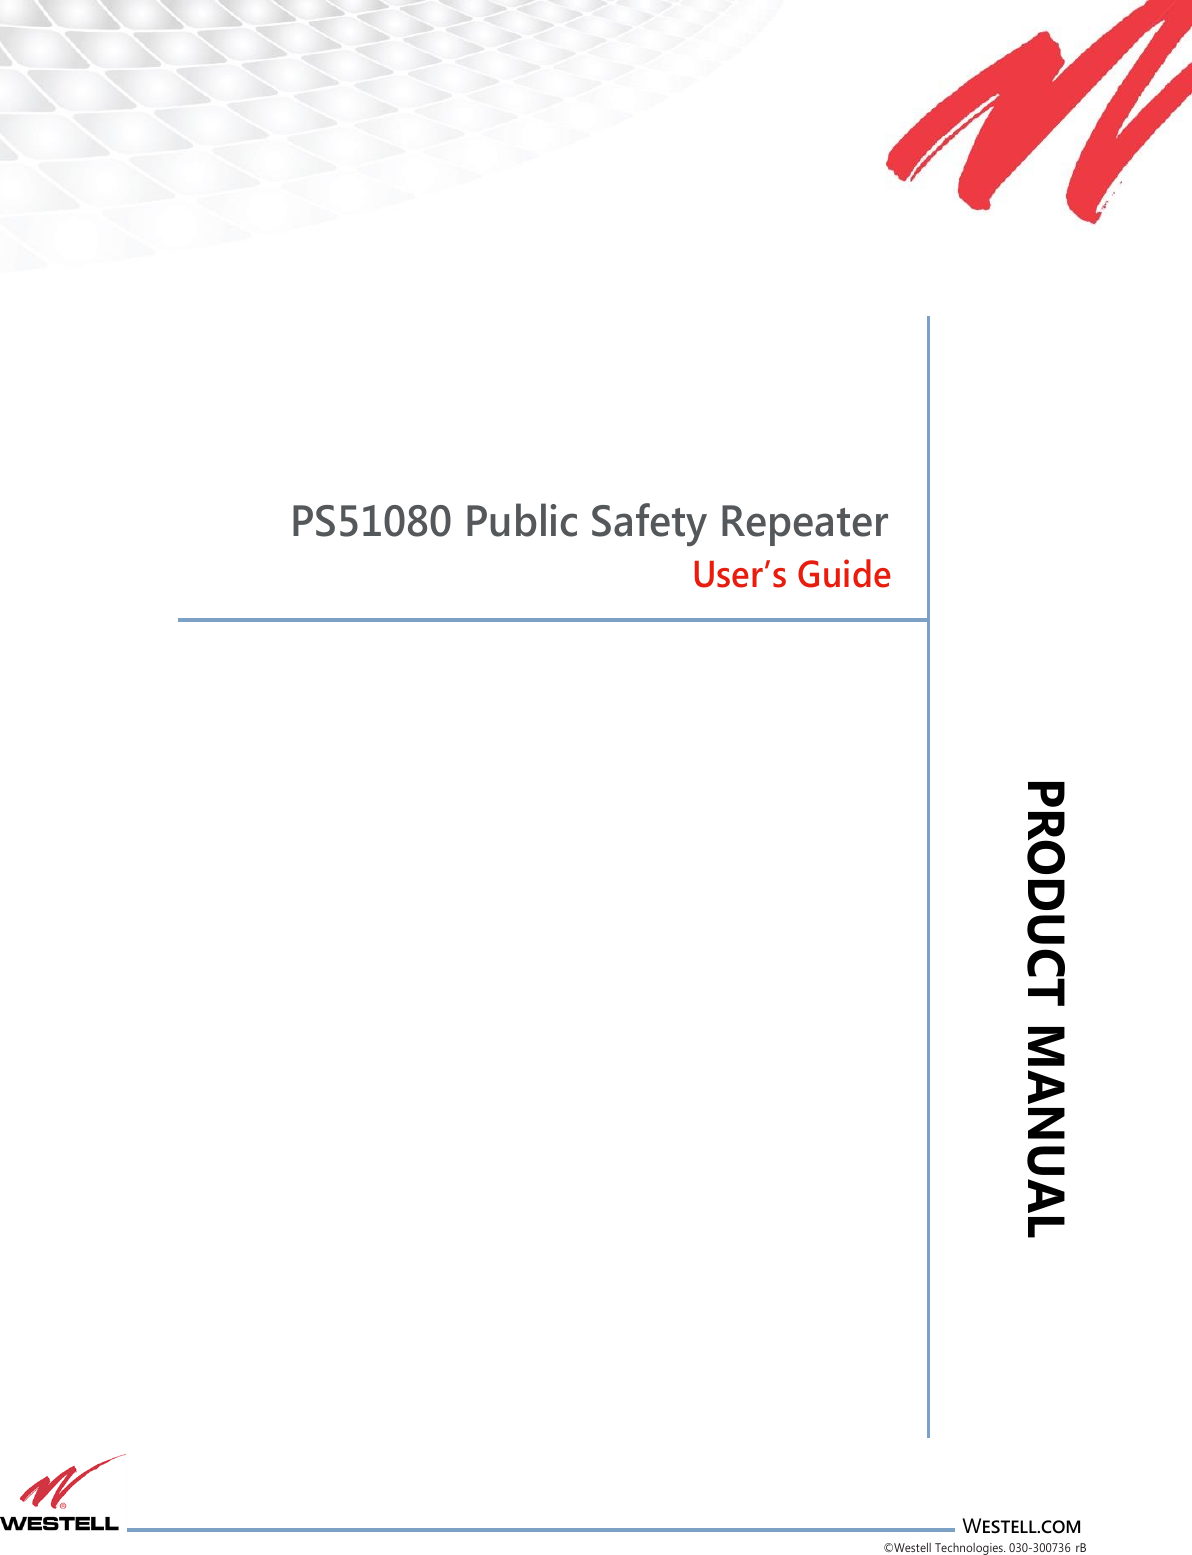 PRODUCT MANUAL                       WESTELL.COM ©Westell Technologies. 030-300736 rB                                                                 PS51080 Public Safety Repeater                                                                      User’s Guide     